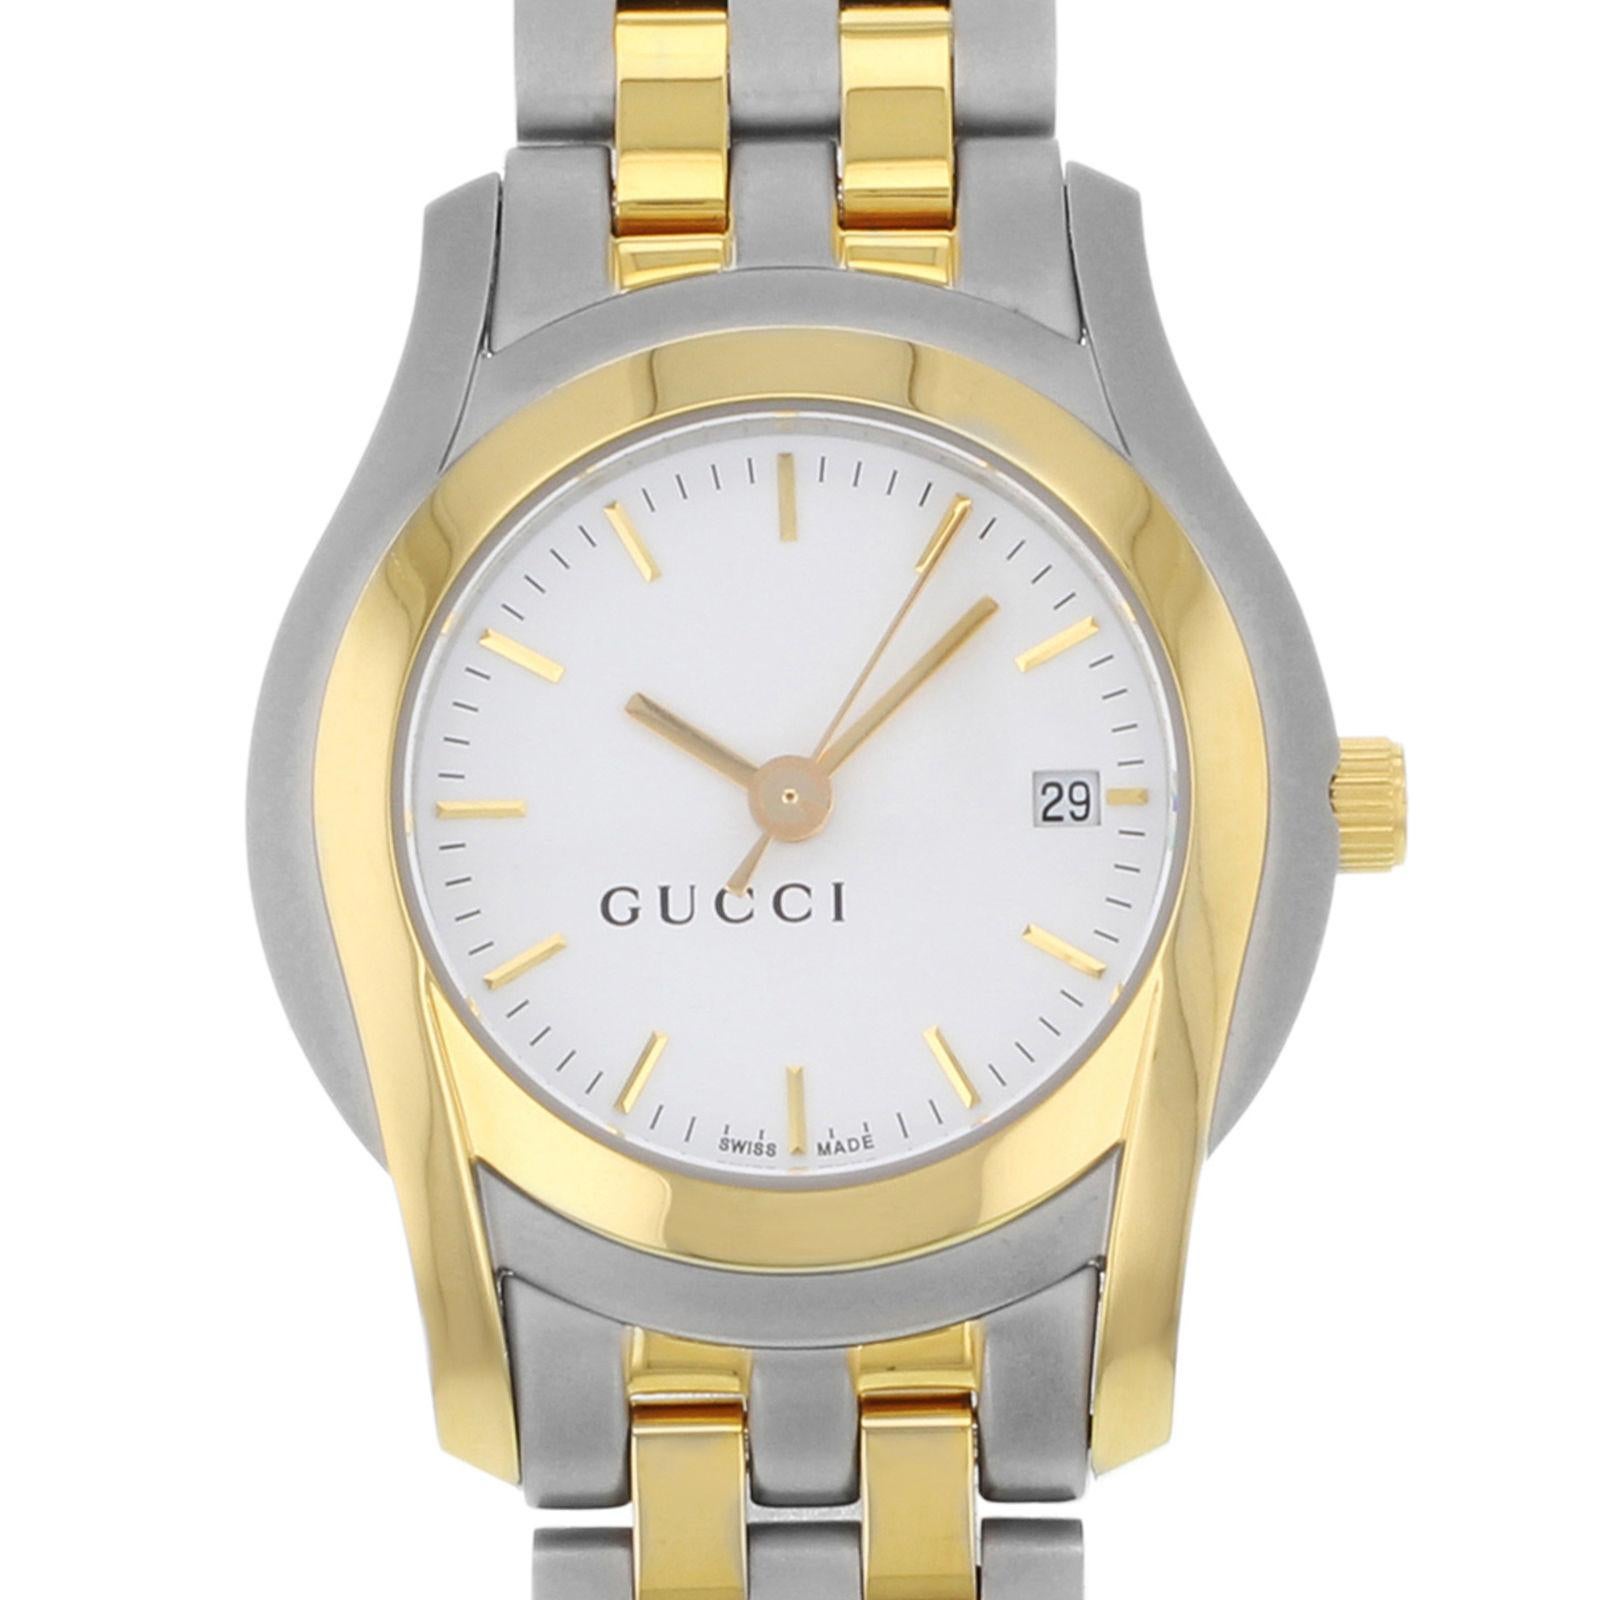 (13001)
This pre-owned Gucci 5500L YA055528 is a beautiful Womens timepiece that is powered by a quartz movement which is cased in a stainless steel case. It has a round shape face, date dial and has hand sticks style markers. It is completed with a